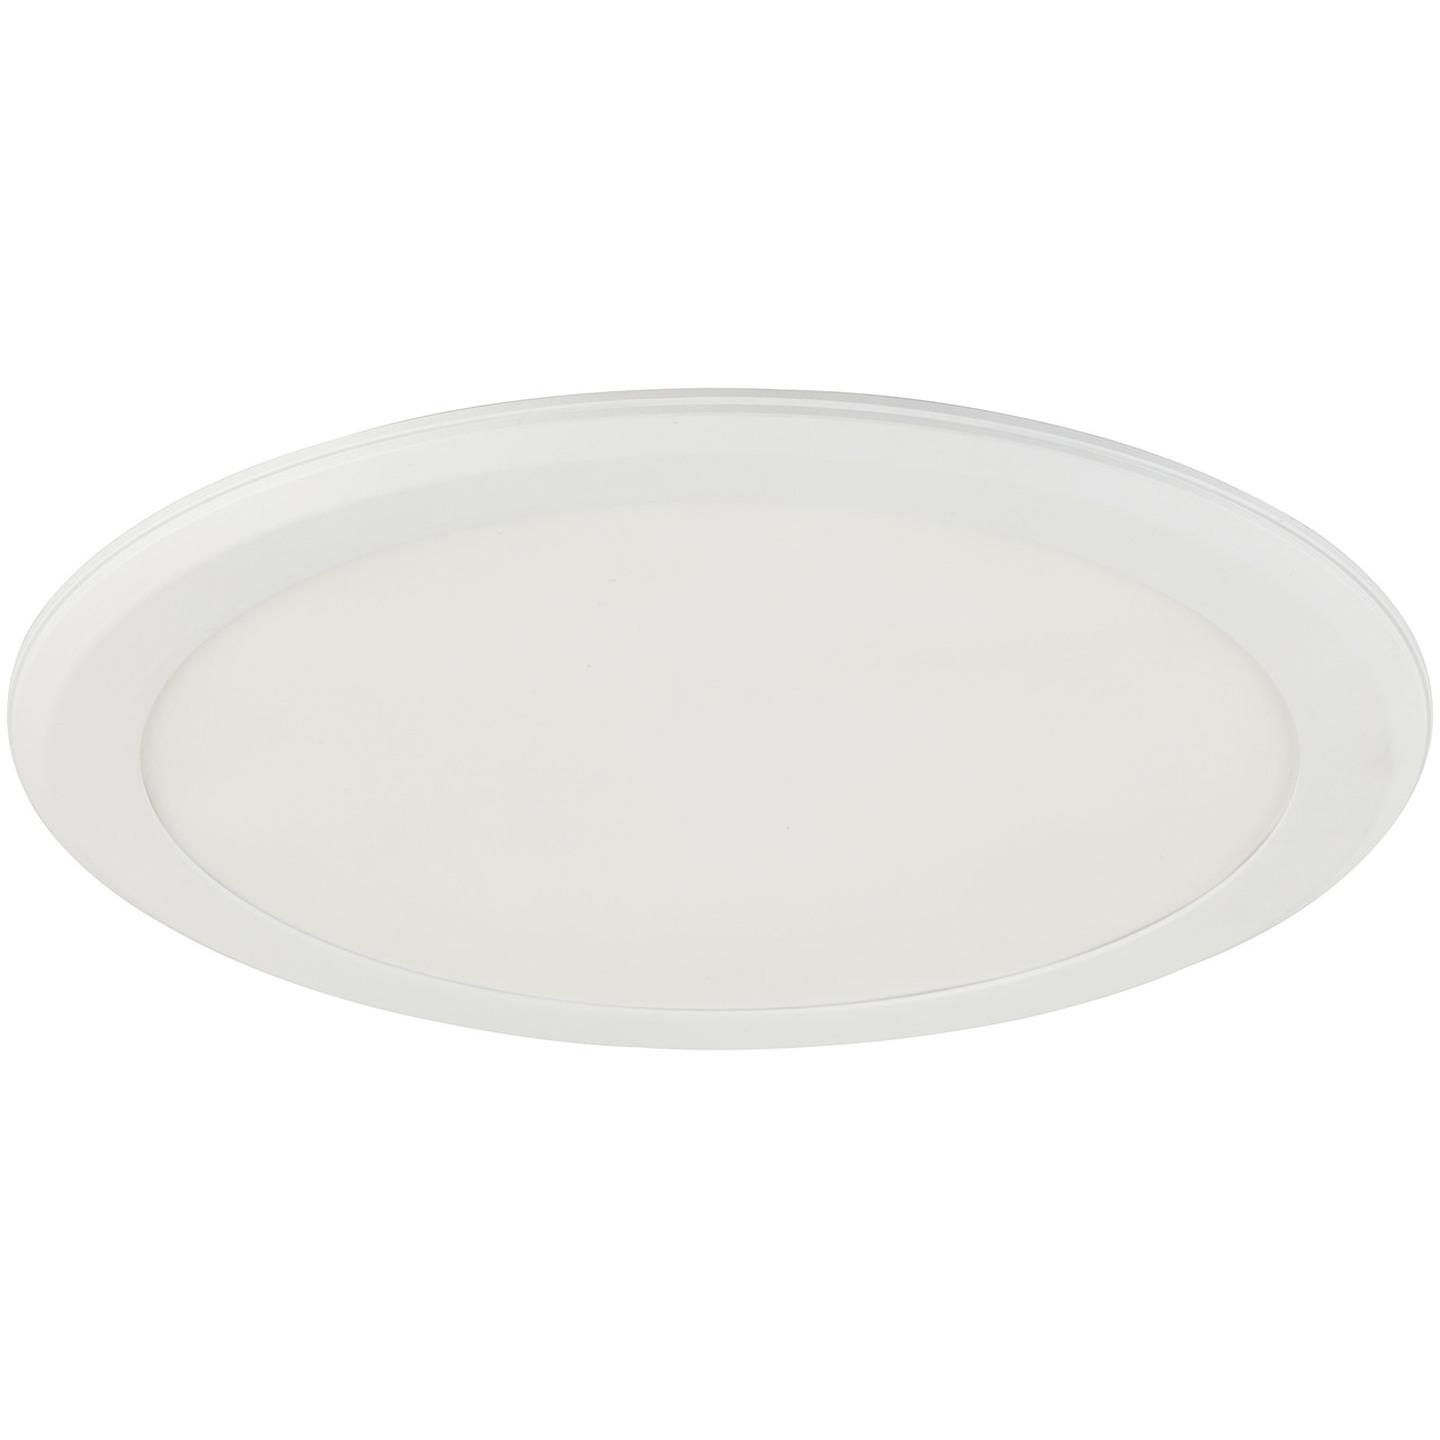 Ultra-Thin LED Panel Roof Light 10W 215mm Cool White